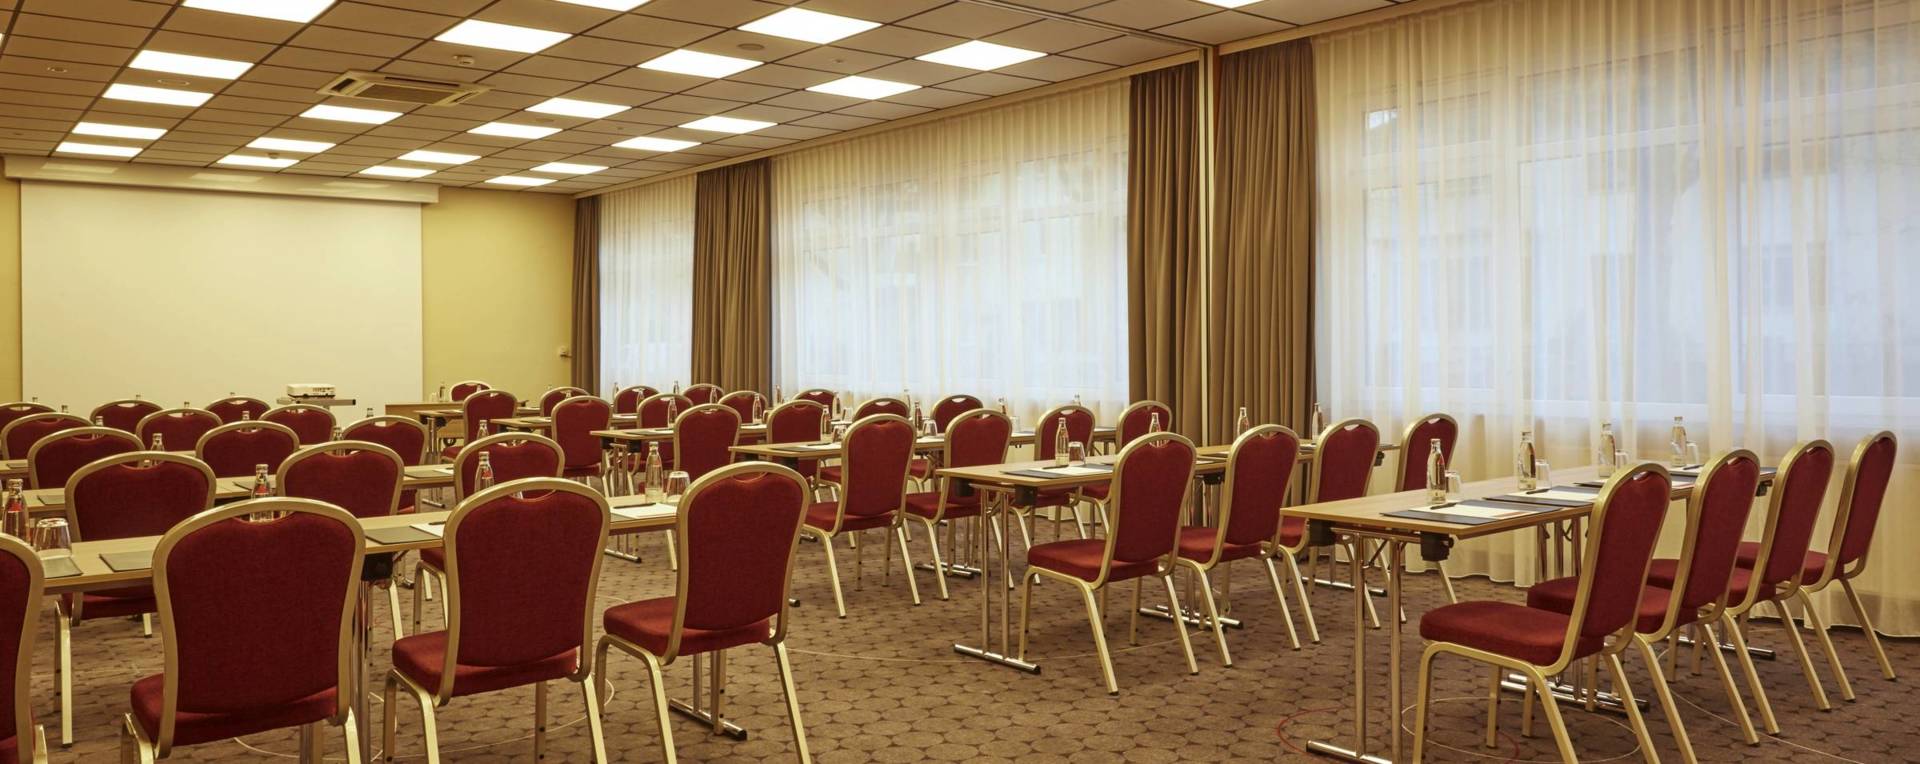 Large meeting rooms at the H+ Hotel Darmstadt - Official website